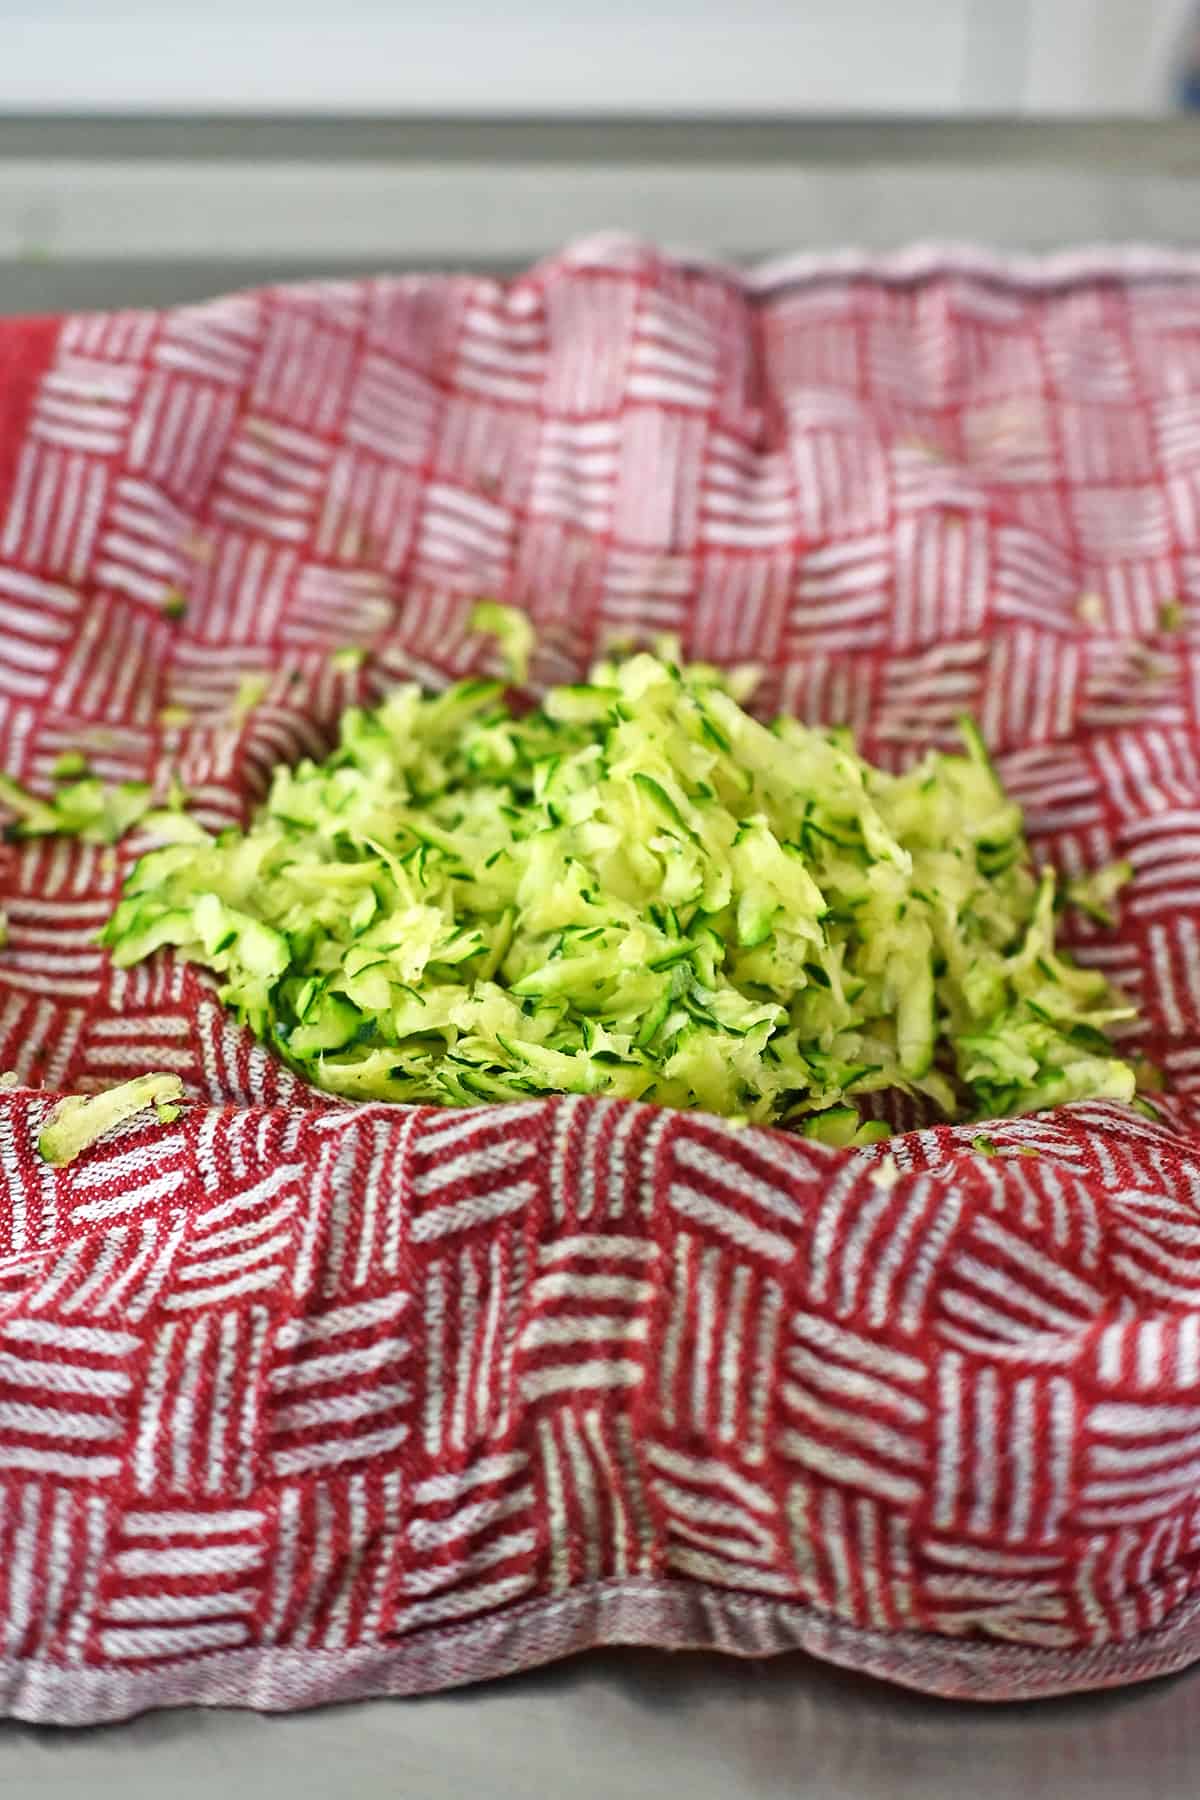 Shredded zucchini that has been squeezed dry in a red and white kitchen towel.